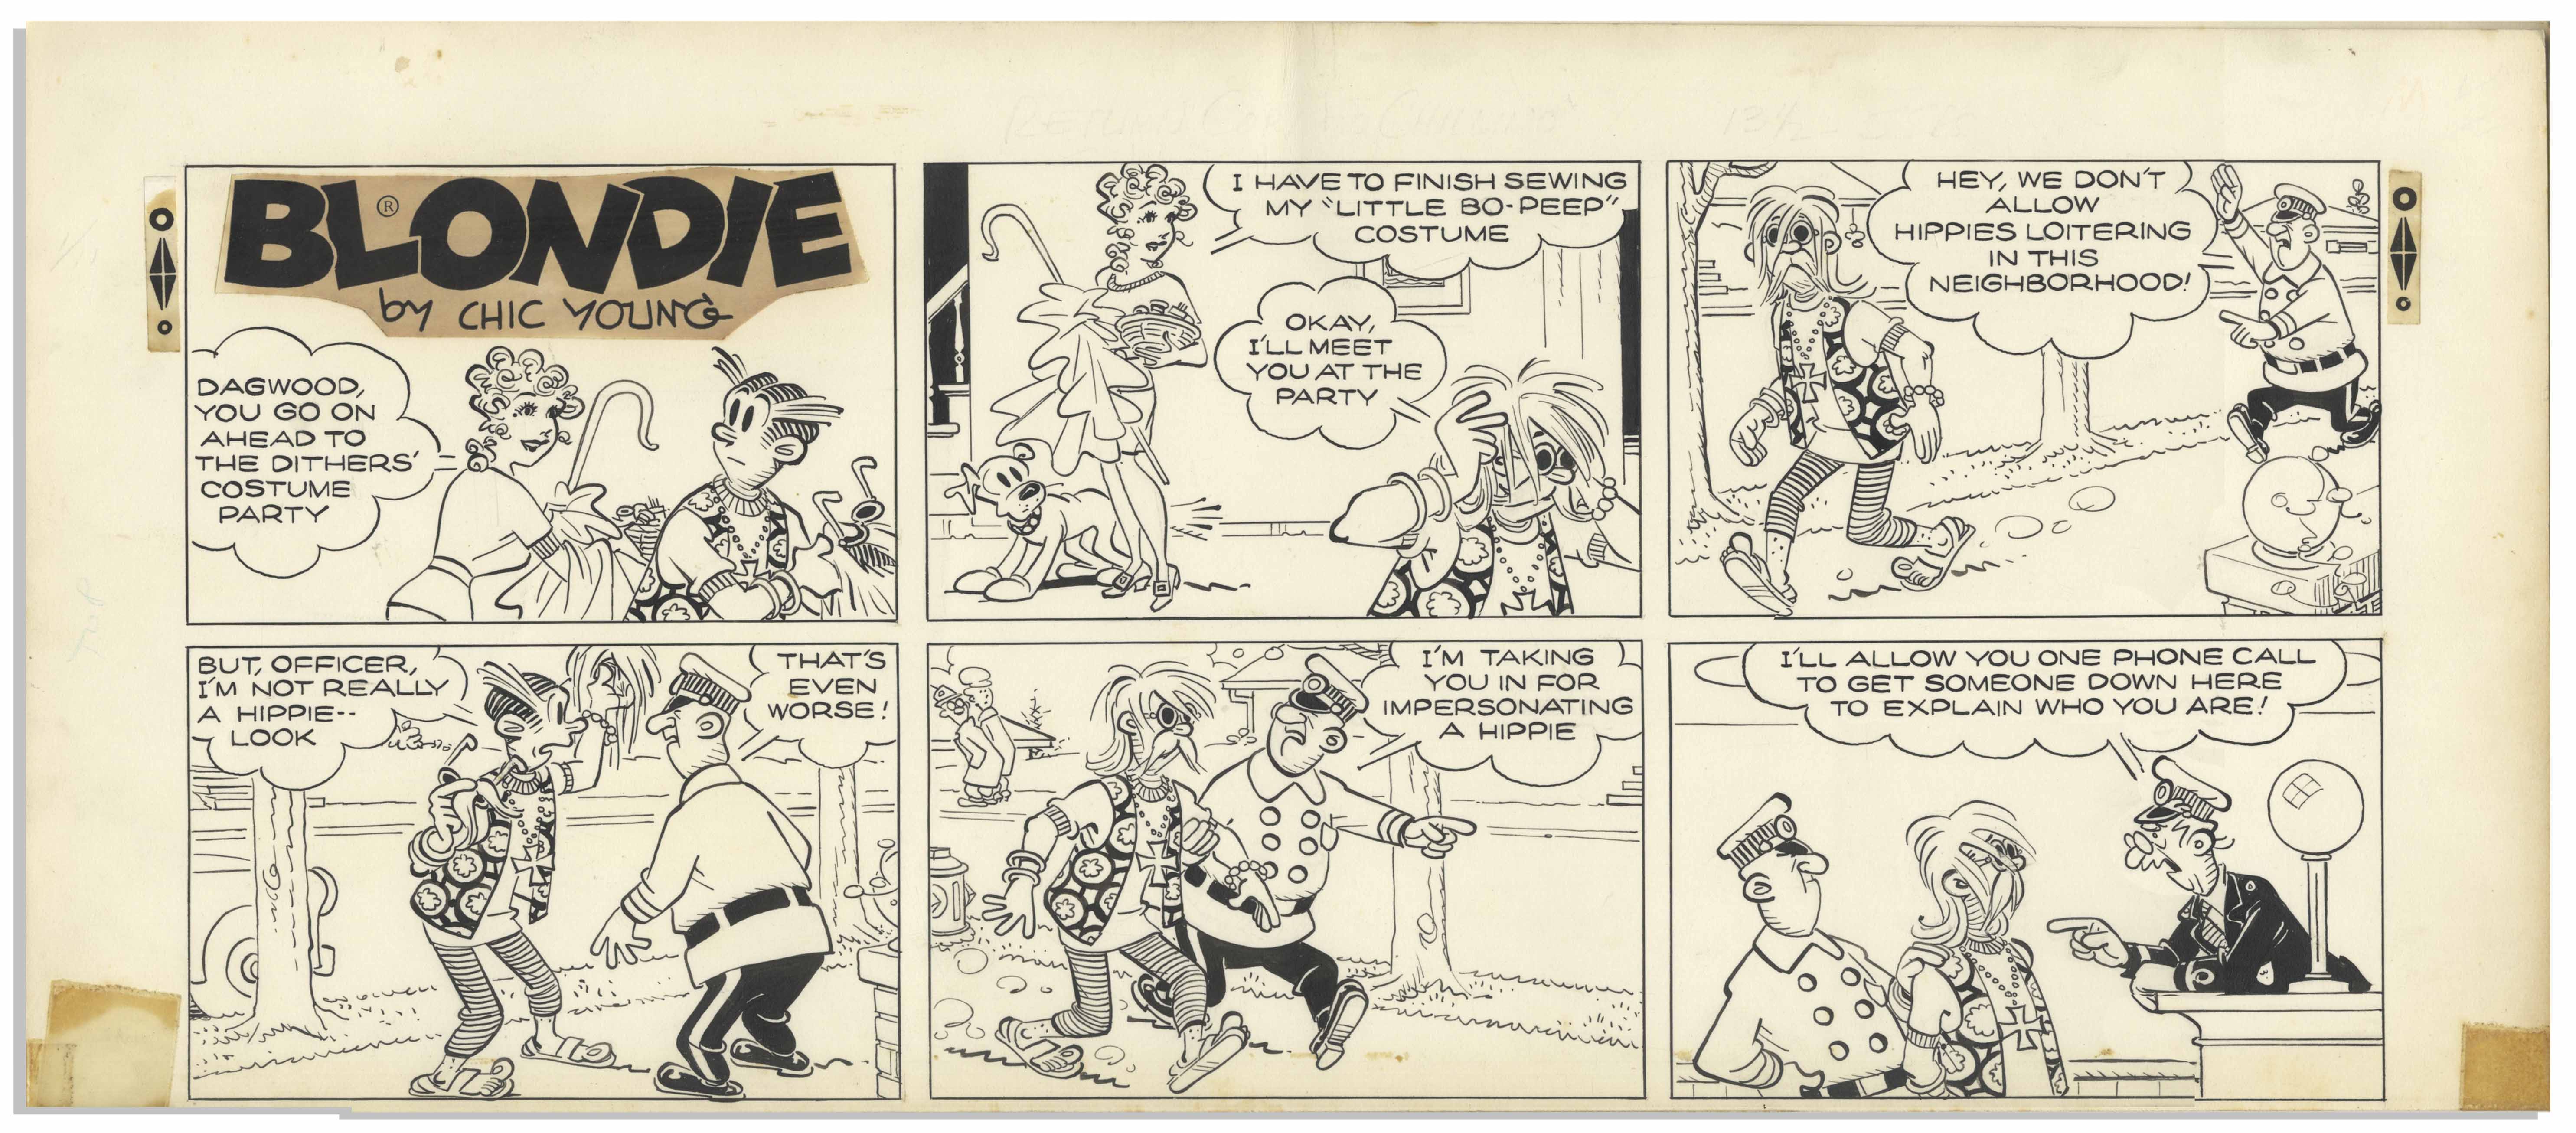 Lot Detail Chic Young Hand Drawn #39 #39 Blondie #39 #39 Sunday Comic Strip From